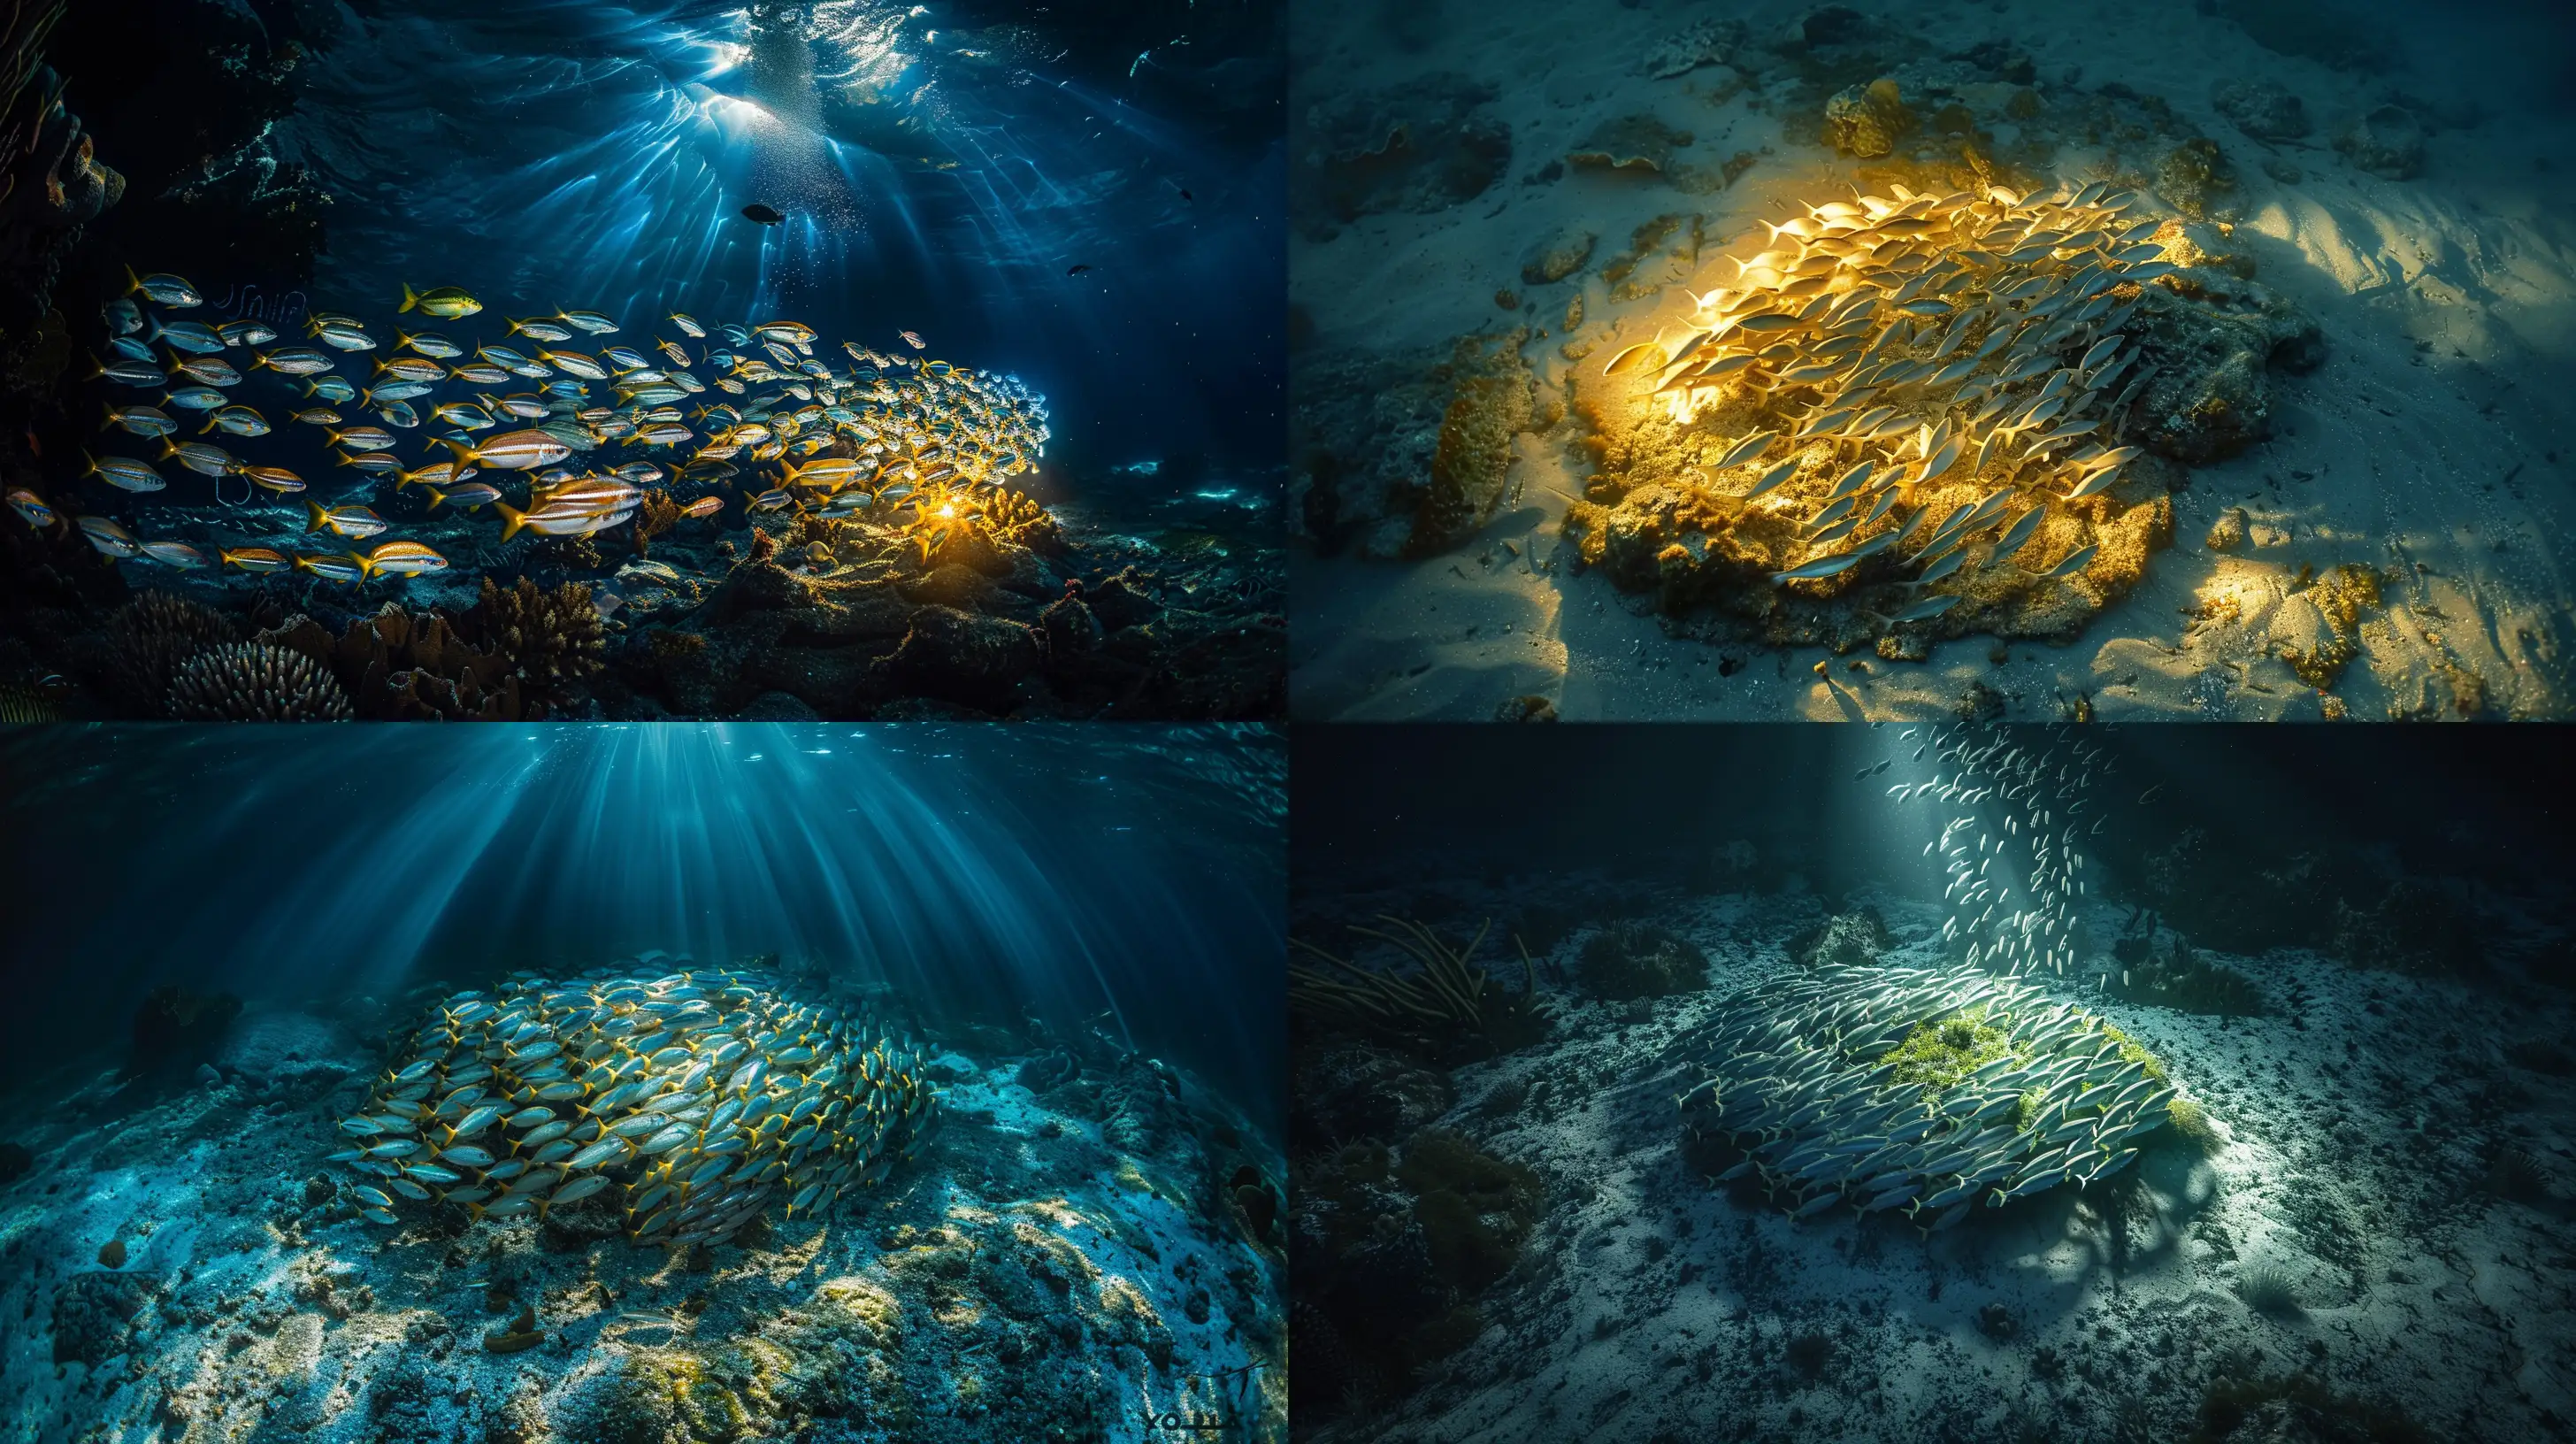 national geographic photo of a shoal of fish form the phrase [no garbage] as they swim along the bottom of the sea, the light penetrates the water and magically illuminates the scene --ar 16:9 --style raw